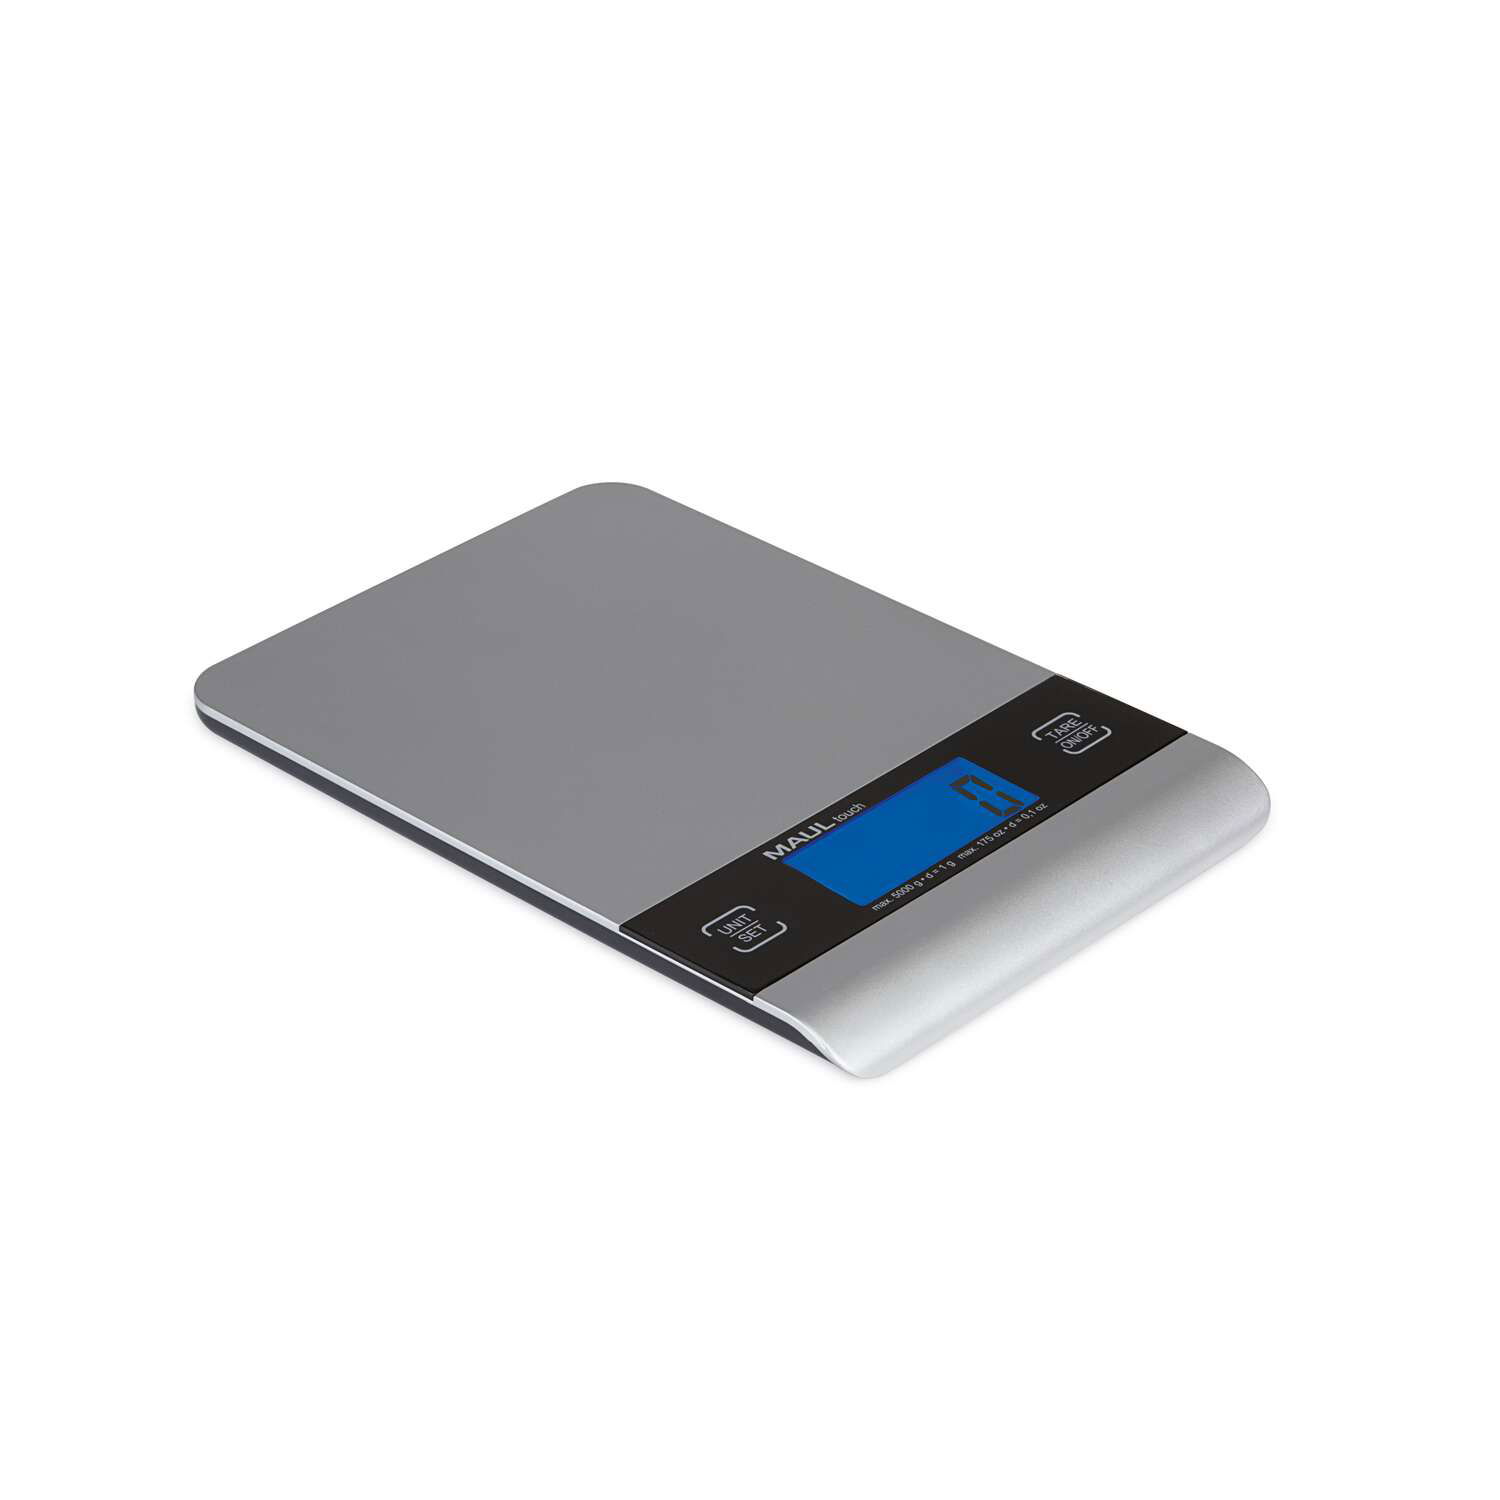 Briefwaage MAULtouch mit Batterie, 5000 g